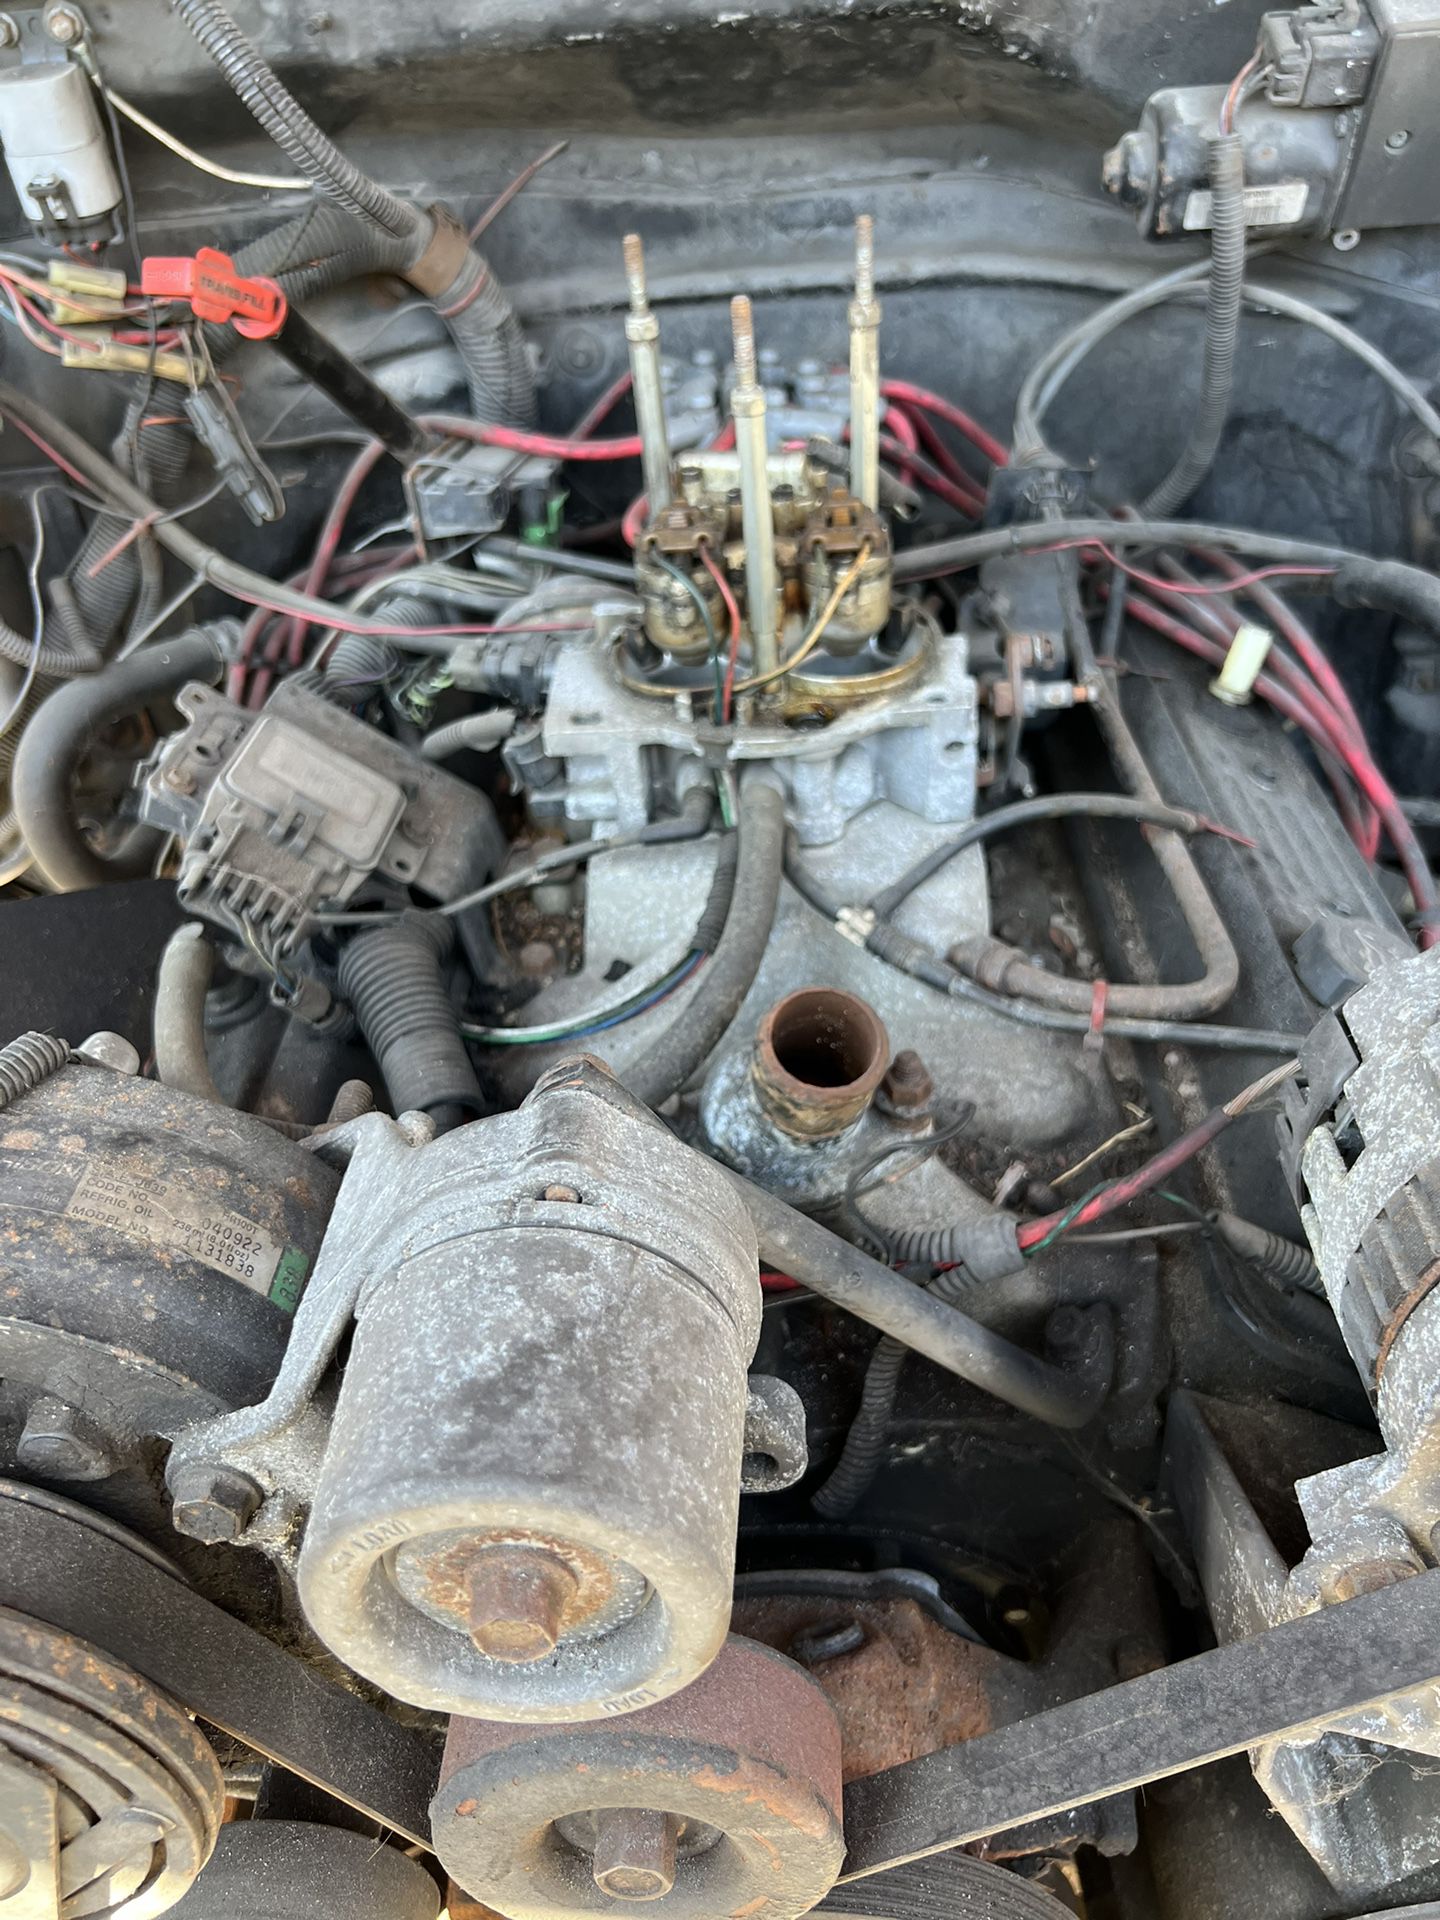 1994 Chevy engine, and transmission